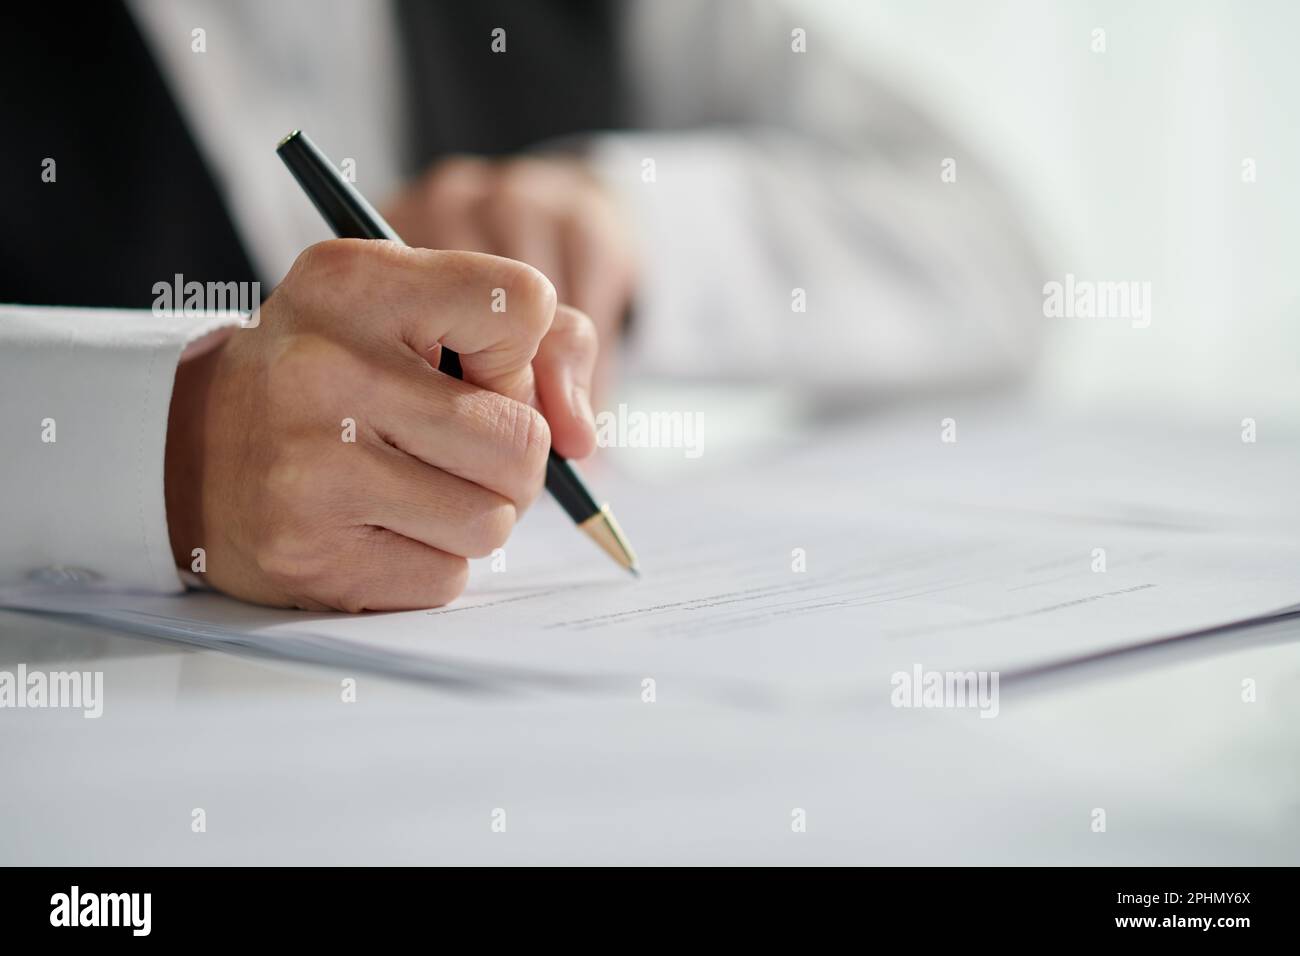 Closeup image of social working signing document Stock Photo